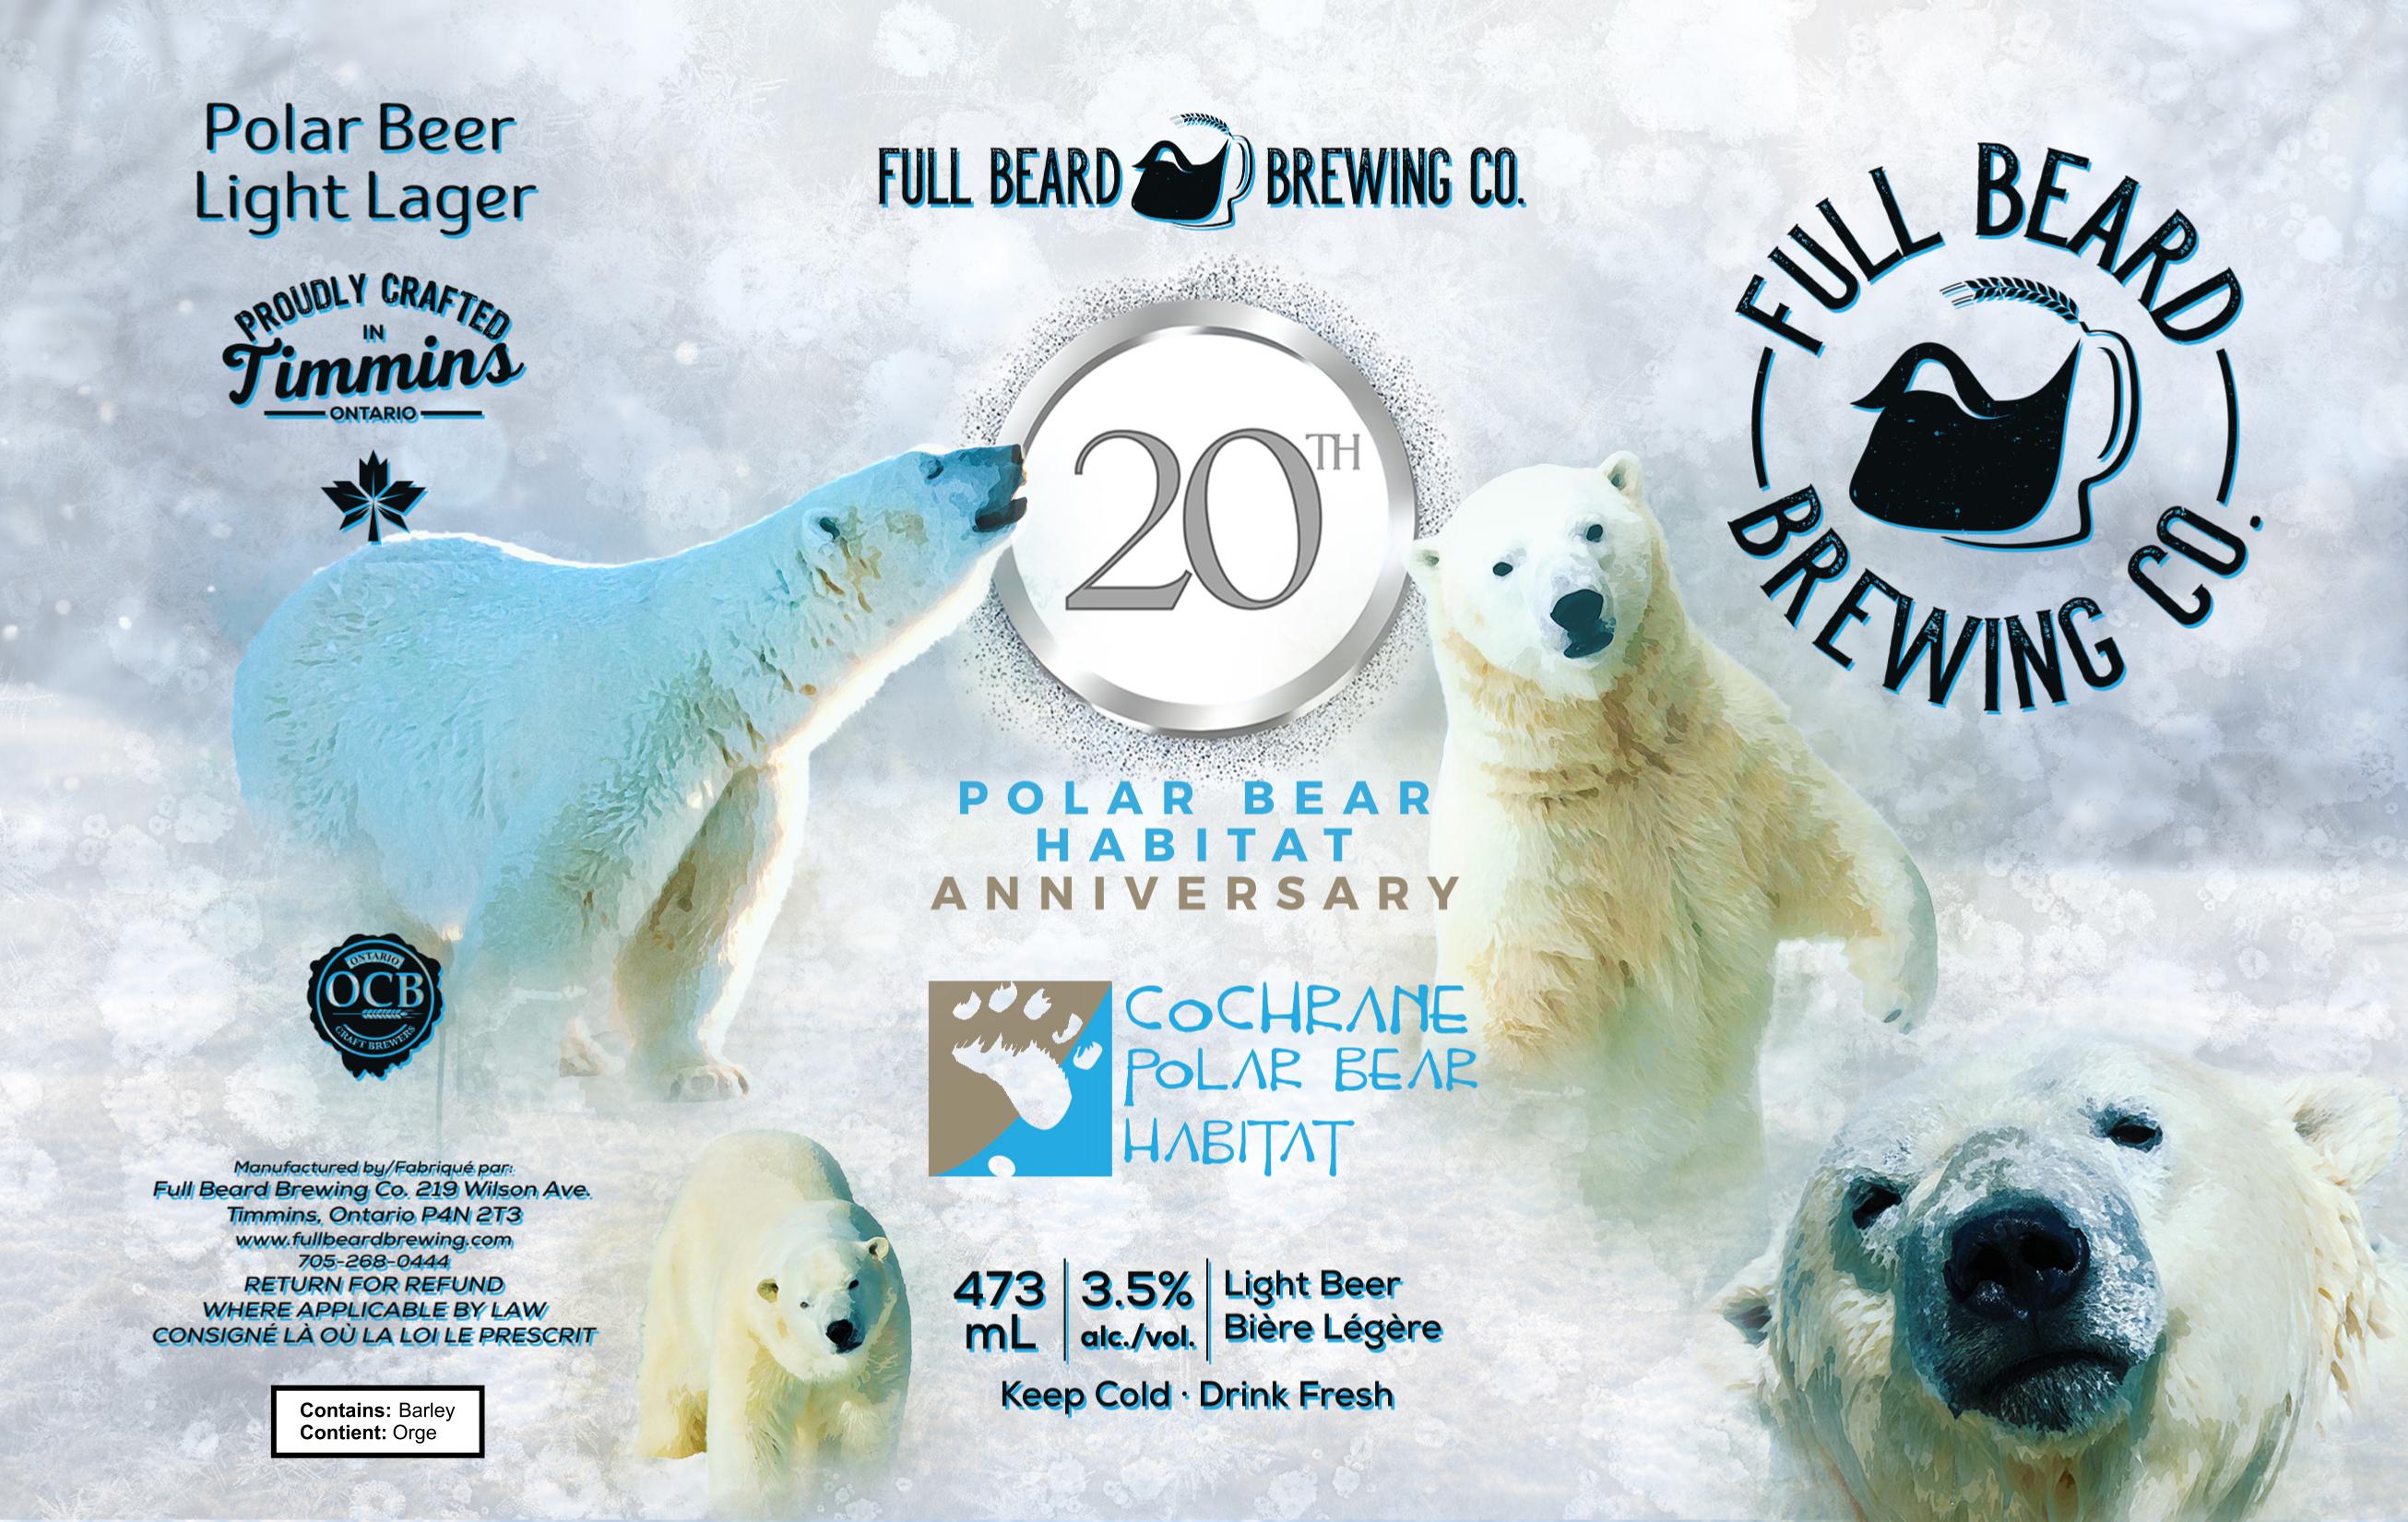 Polar Beer Light Lager PRE-ORDER(READY FOR PICK UP JUNE 8TH AT BREWERY OR AT THE POLARB BEAR HABITAT)